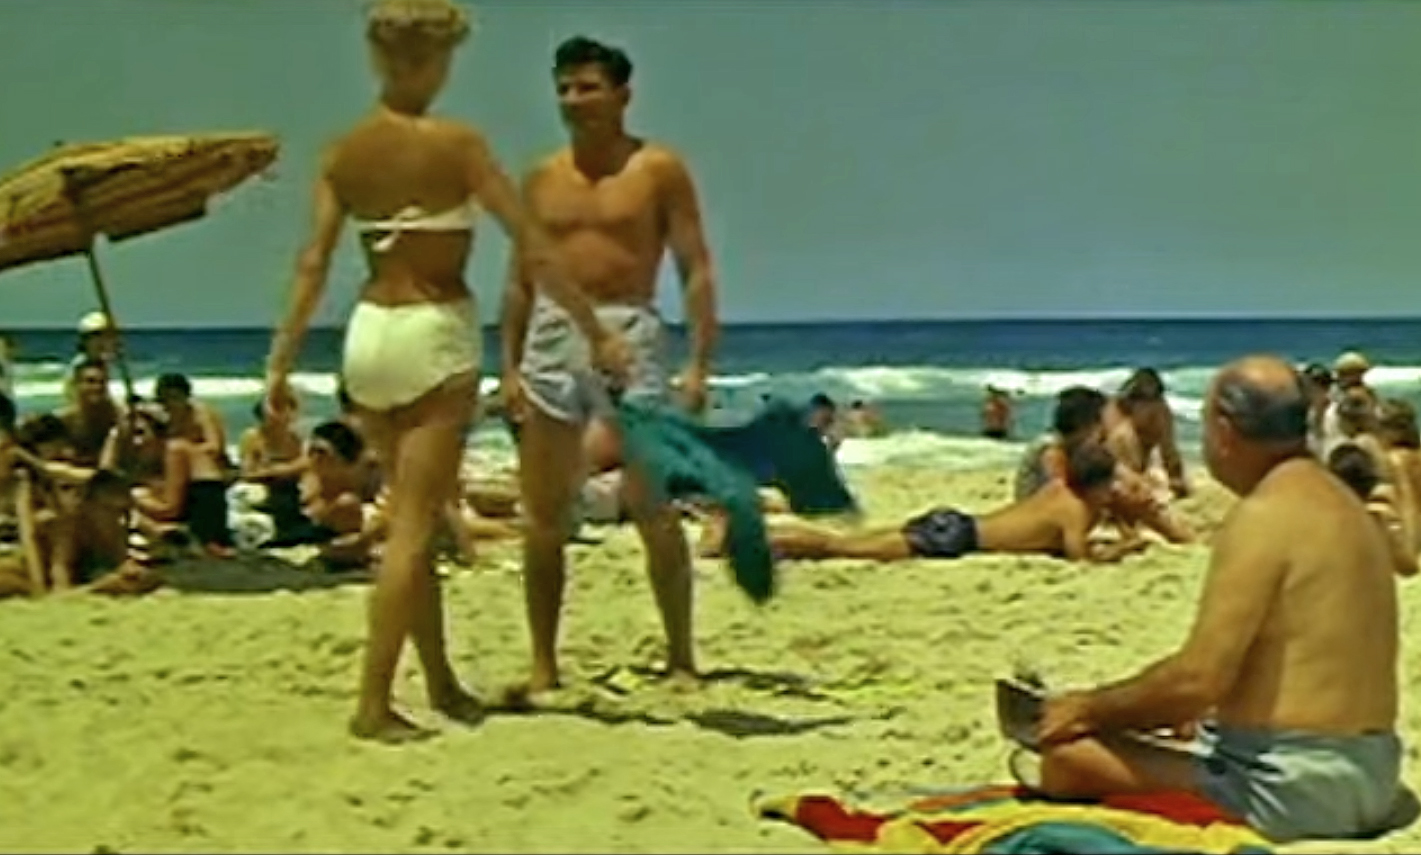 Image 1 for “Queensland Playground” – a leisurely 8 minutes of joy from the Gold Coast in 1957